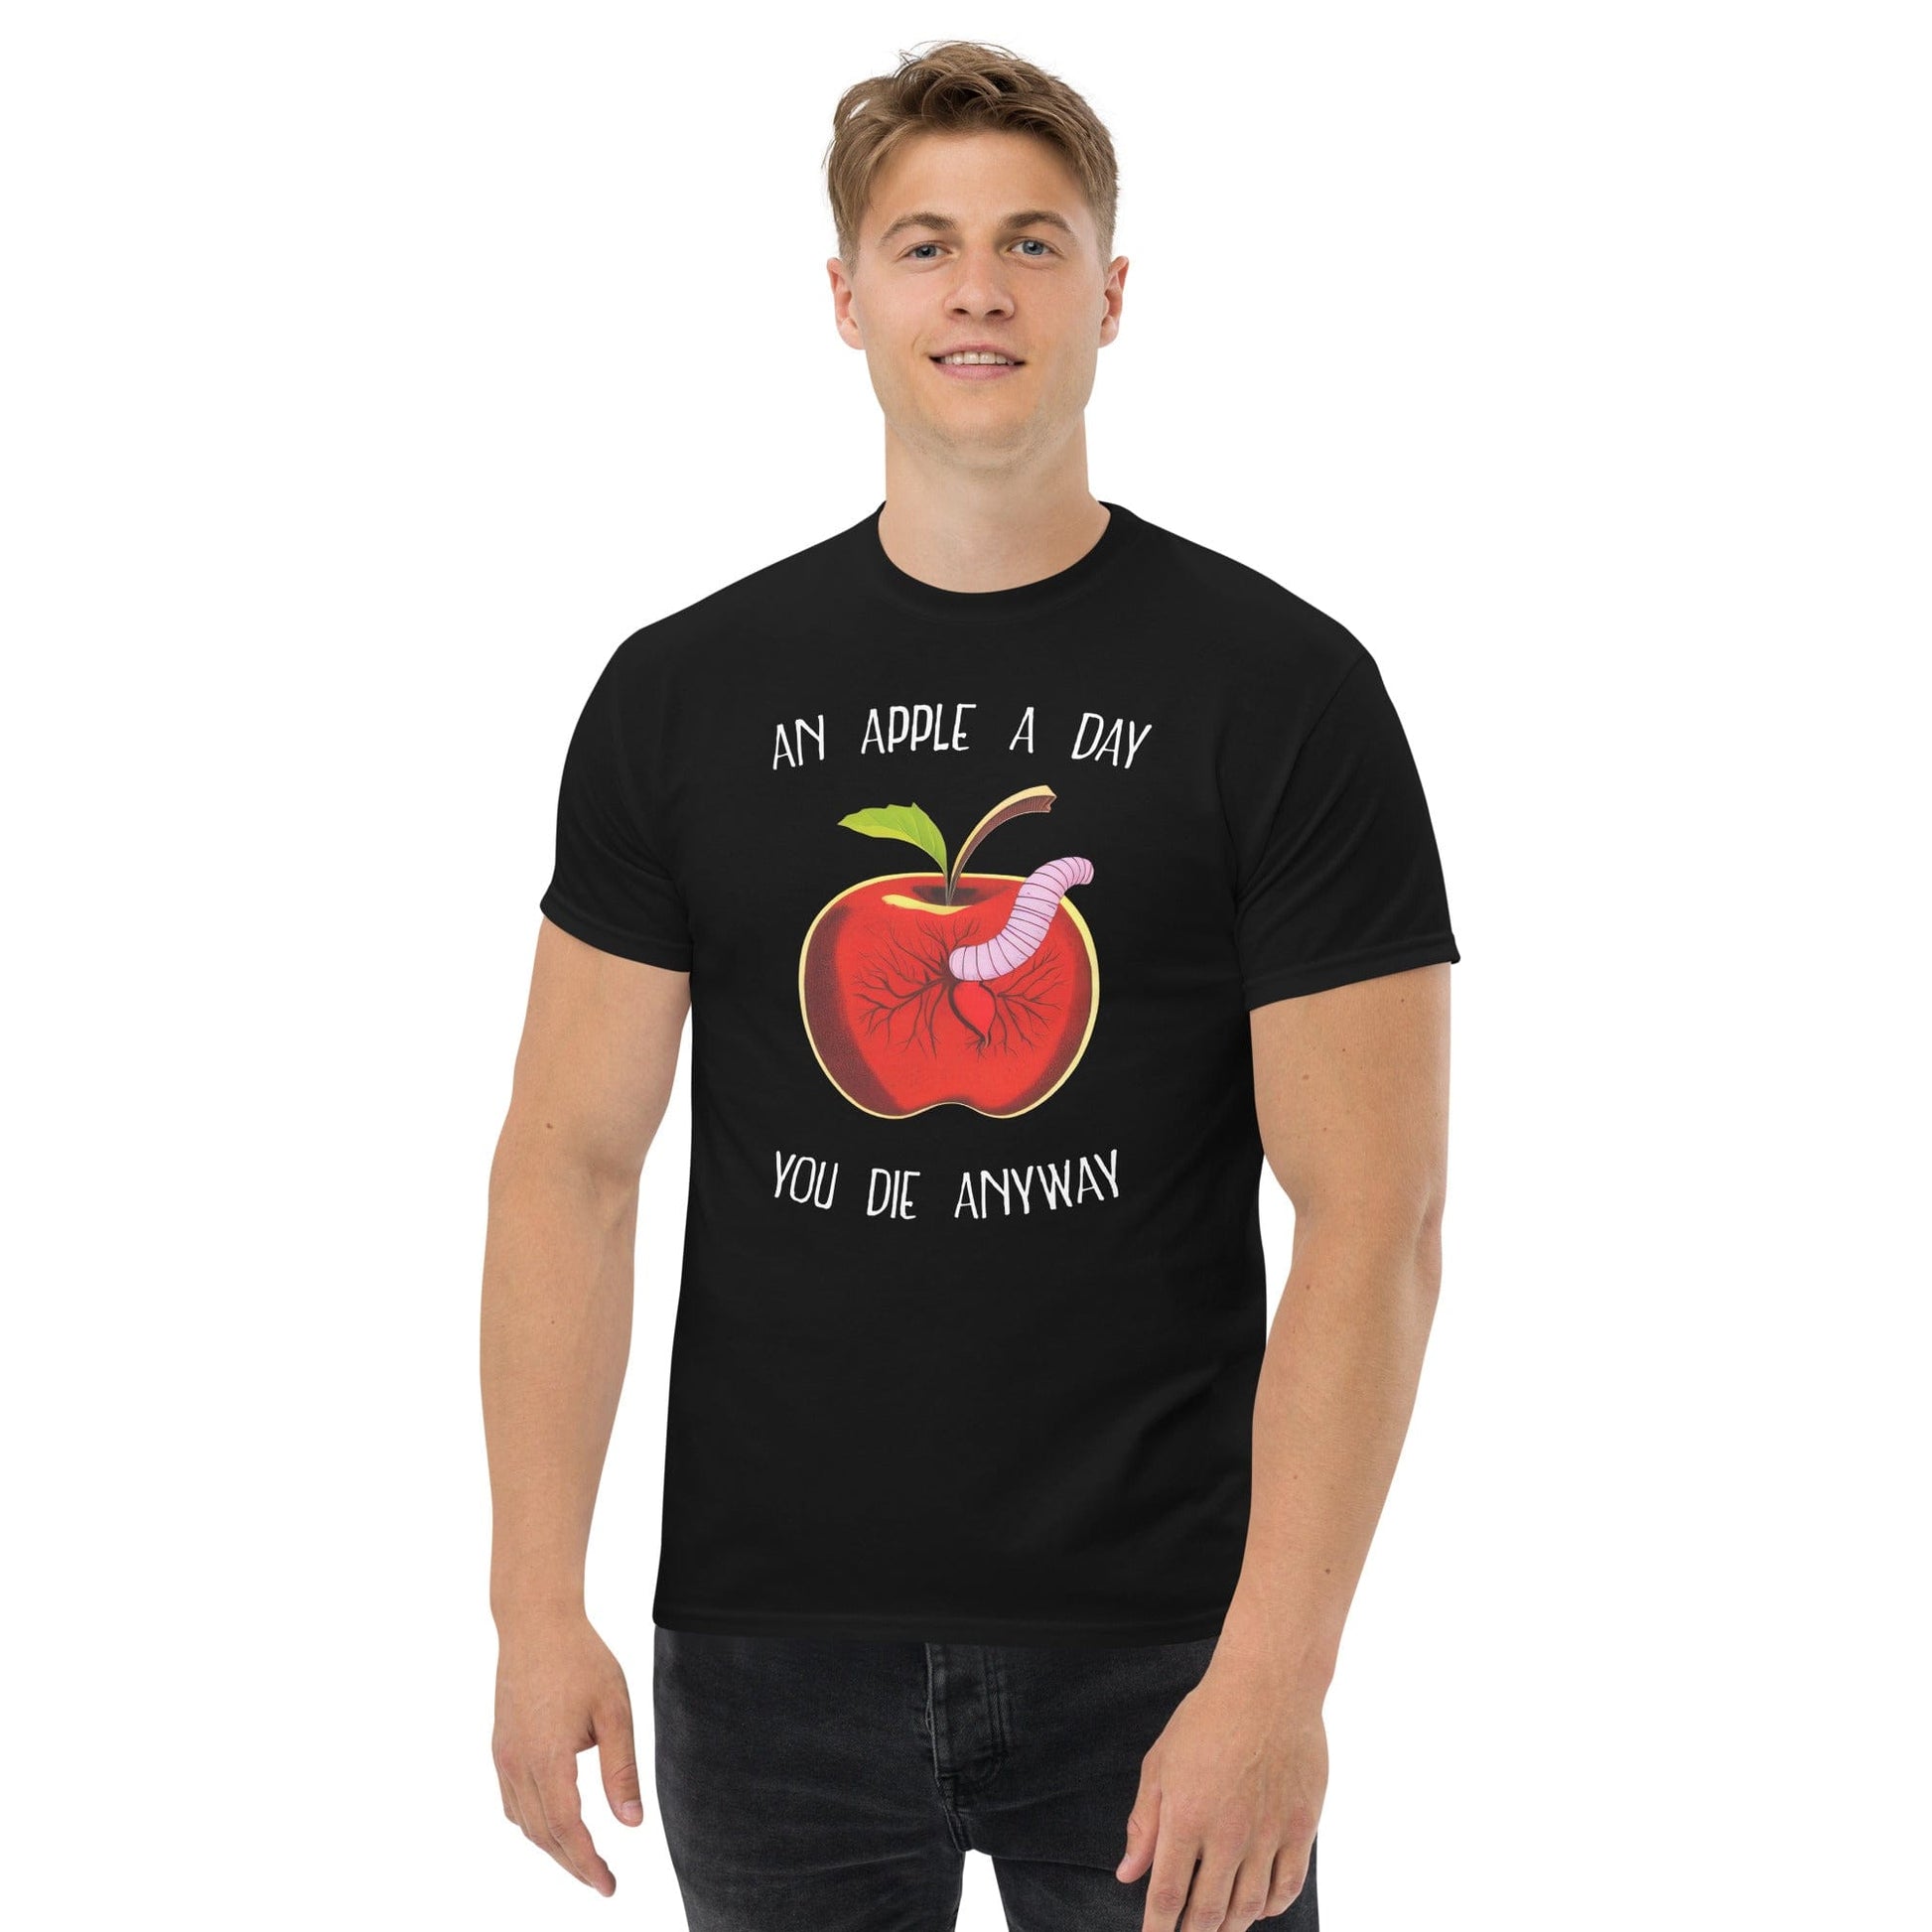 An Apple a day, you die anyway - Plus-Sized T-Shirt